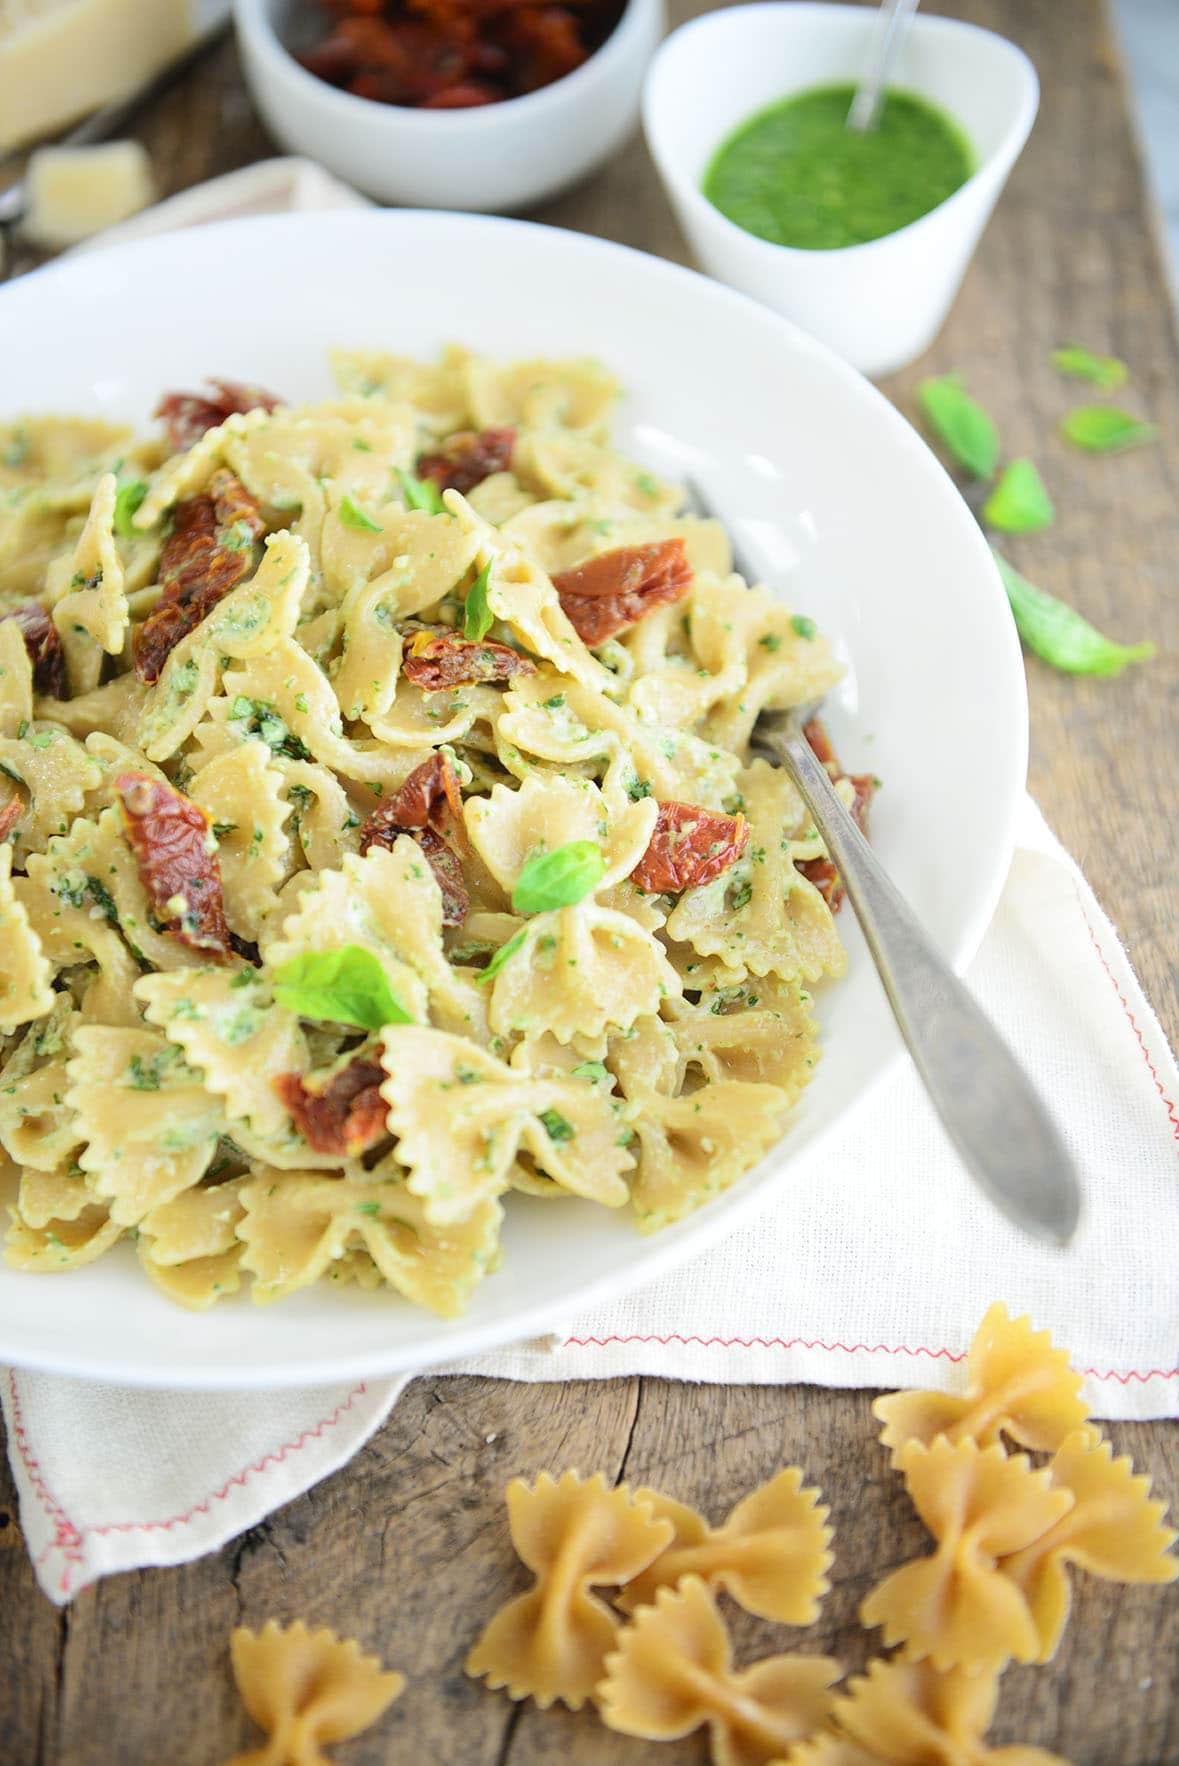 Farfalle pasta with a creamy pesto sauce and sun-dried tomatoes